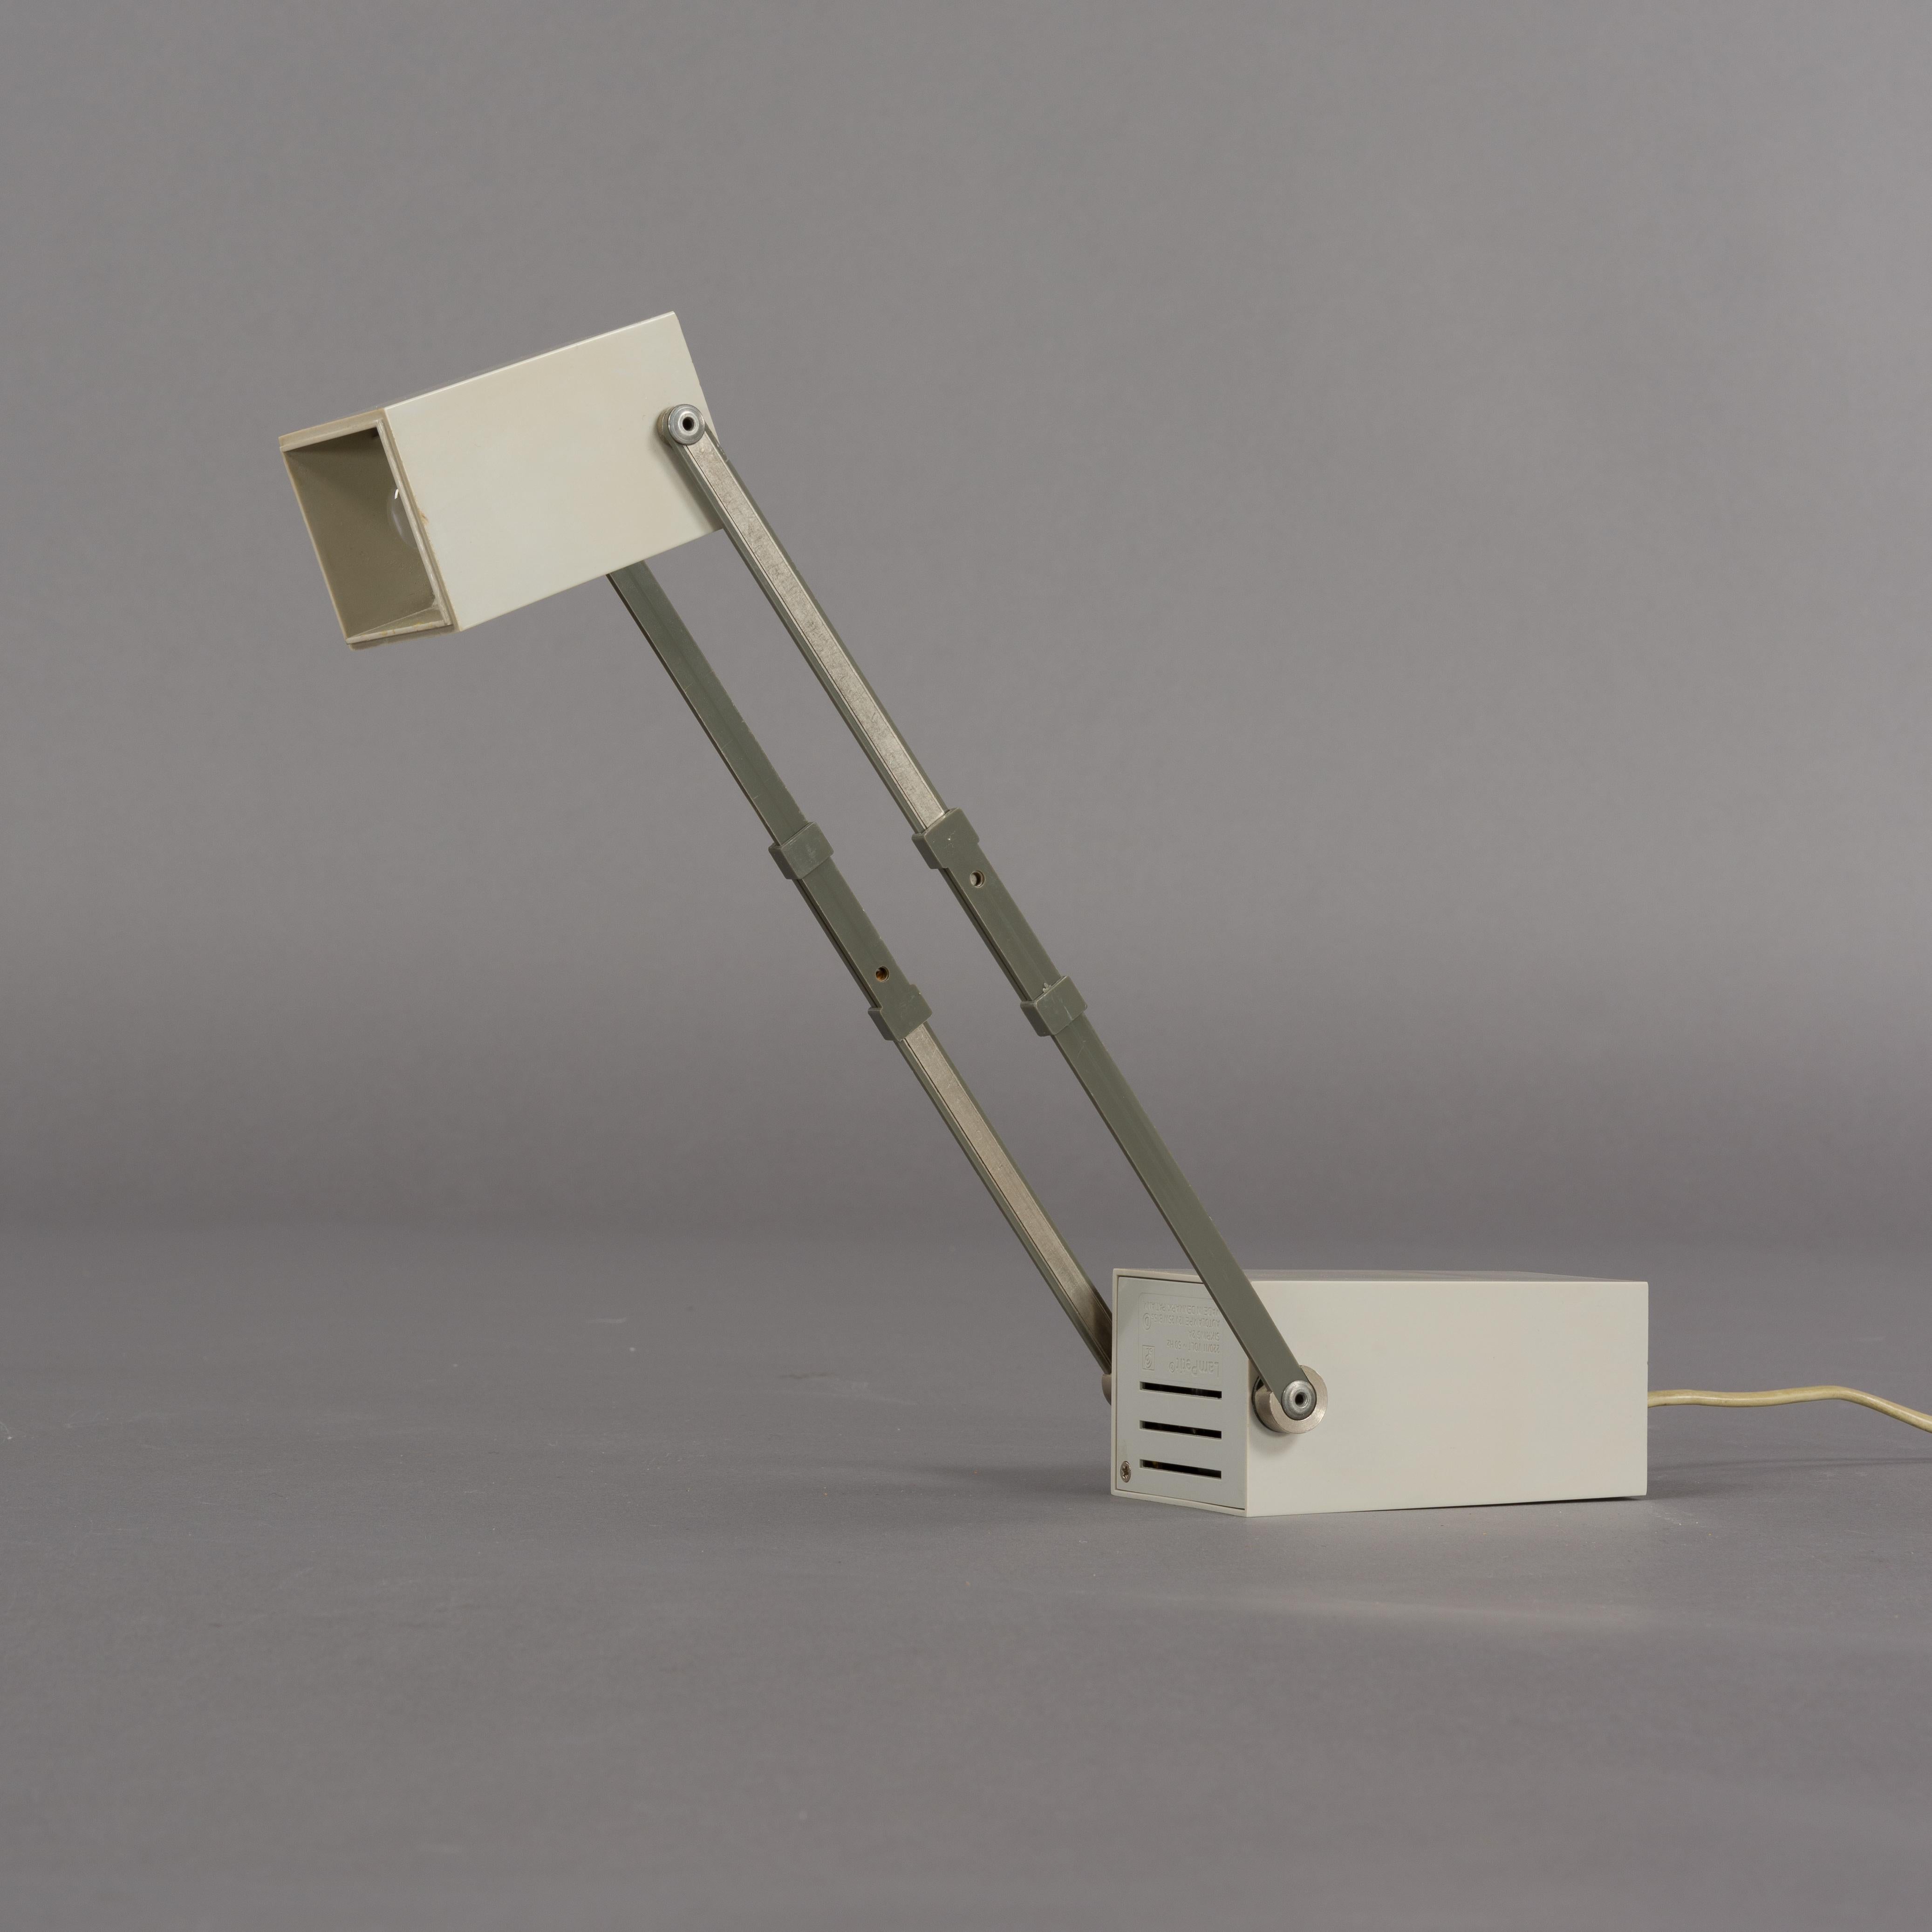 Lampetit lamp in grey designed by Verner Panton for Louis Poulsen in 1966. A small compact lamp with rectangular shapes that was ahead of its time. This lamp is often attributed to the Louis Poulsen design team, however, after the death of Verner